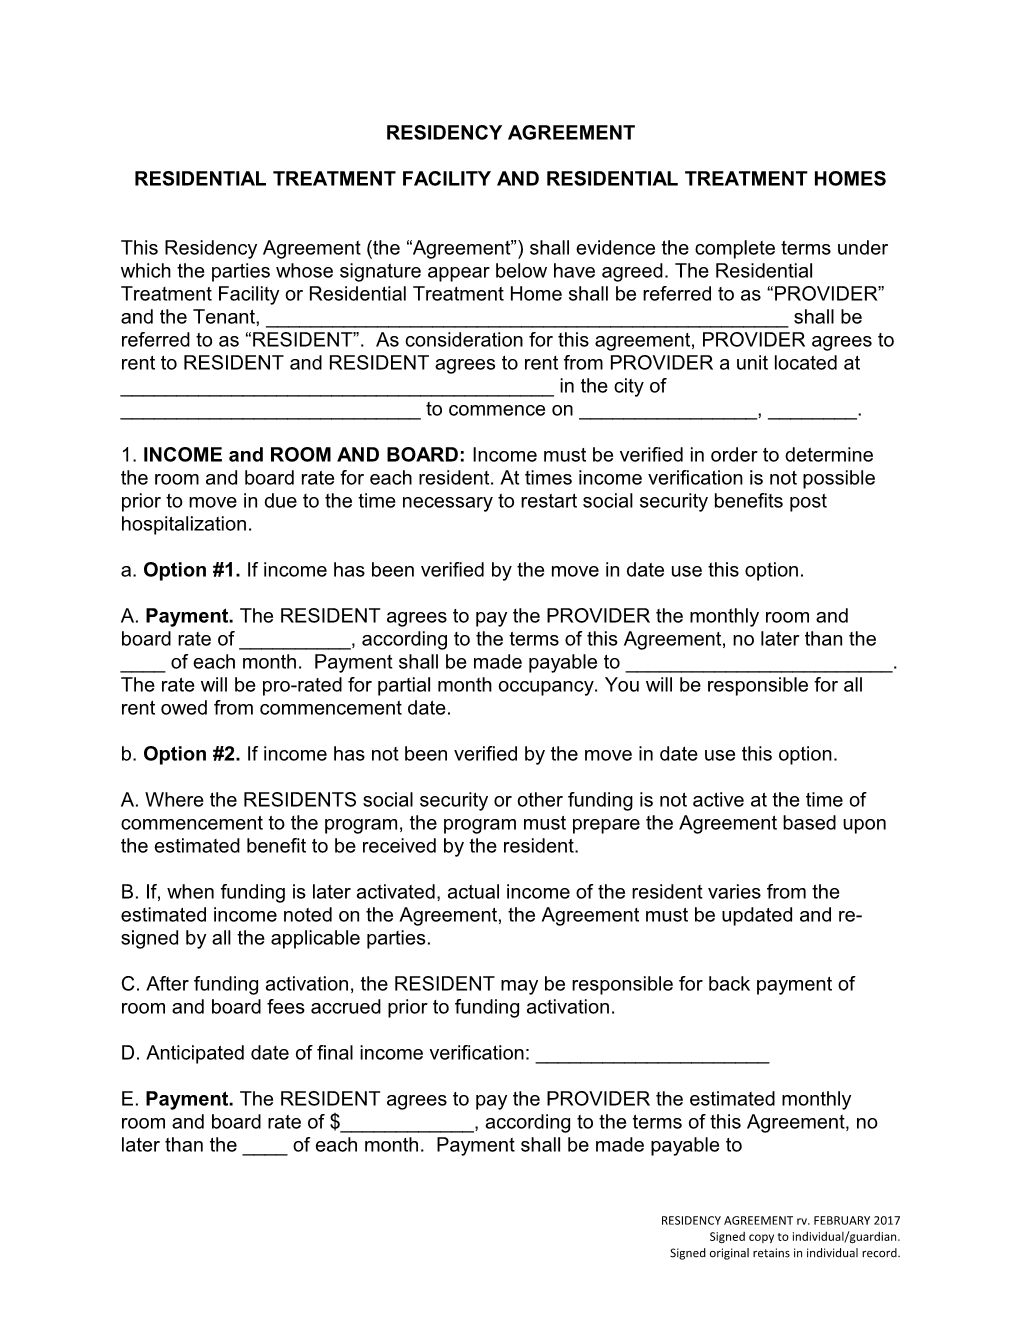 Residency Agreement Template - Residential Treatment Facility and Home